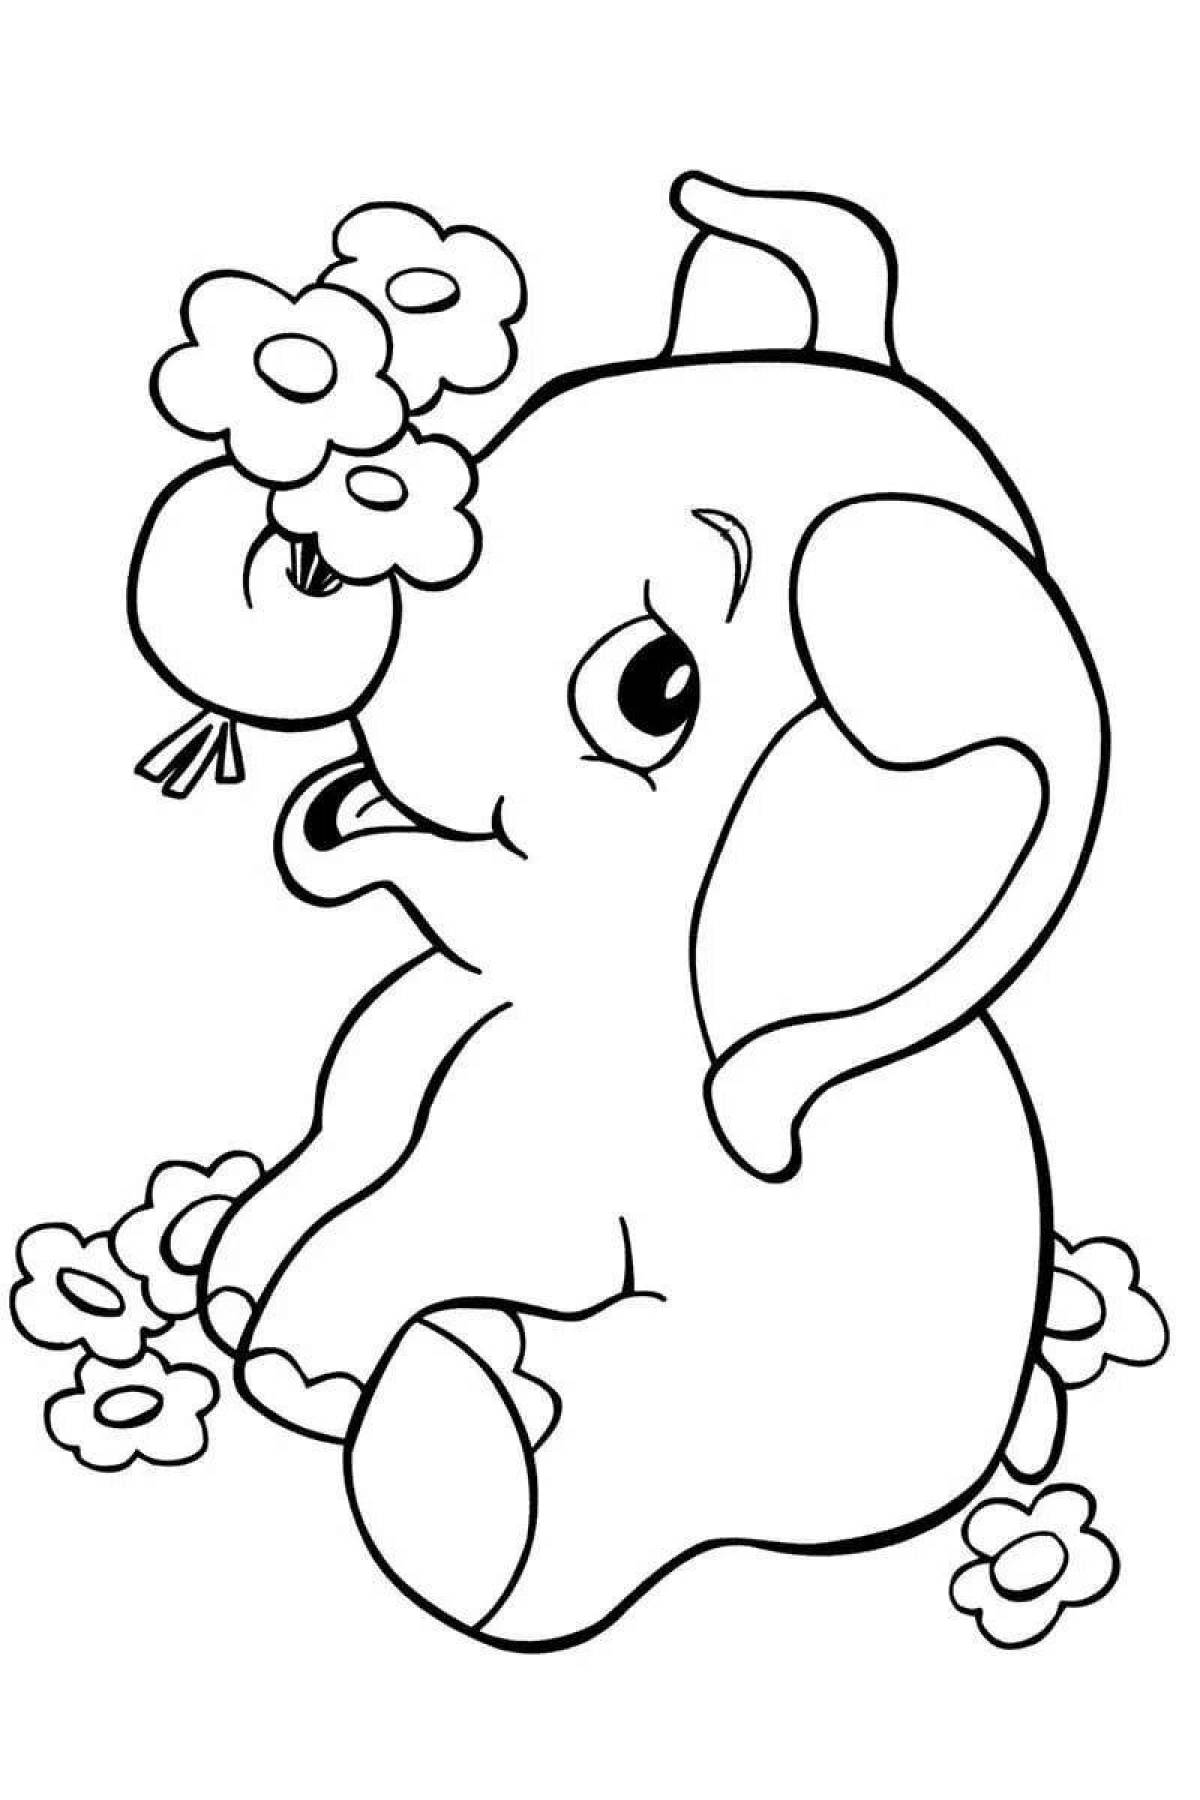 Majestic animals coloring pages for kids